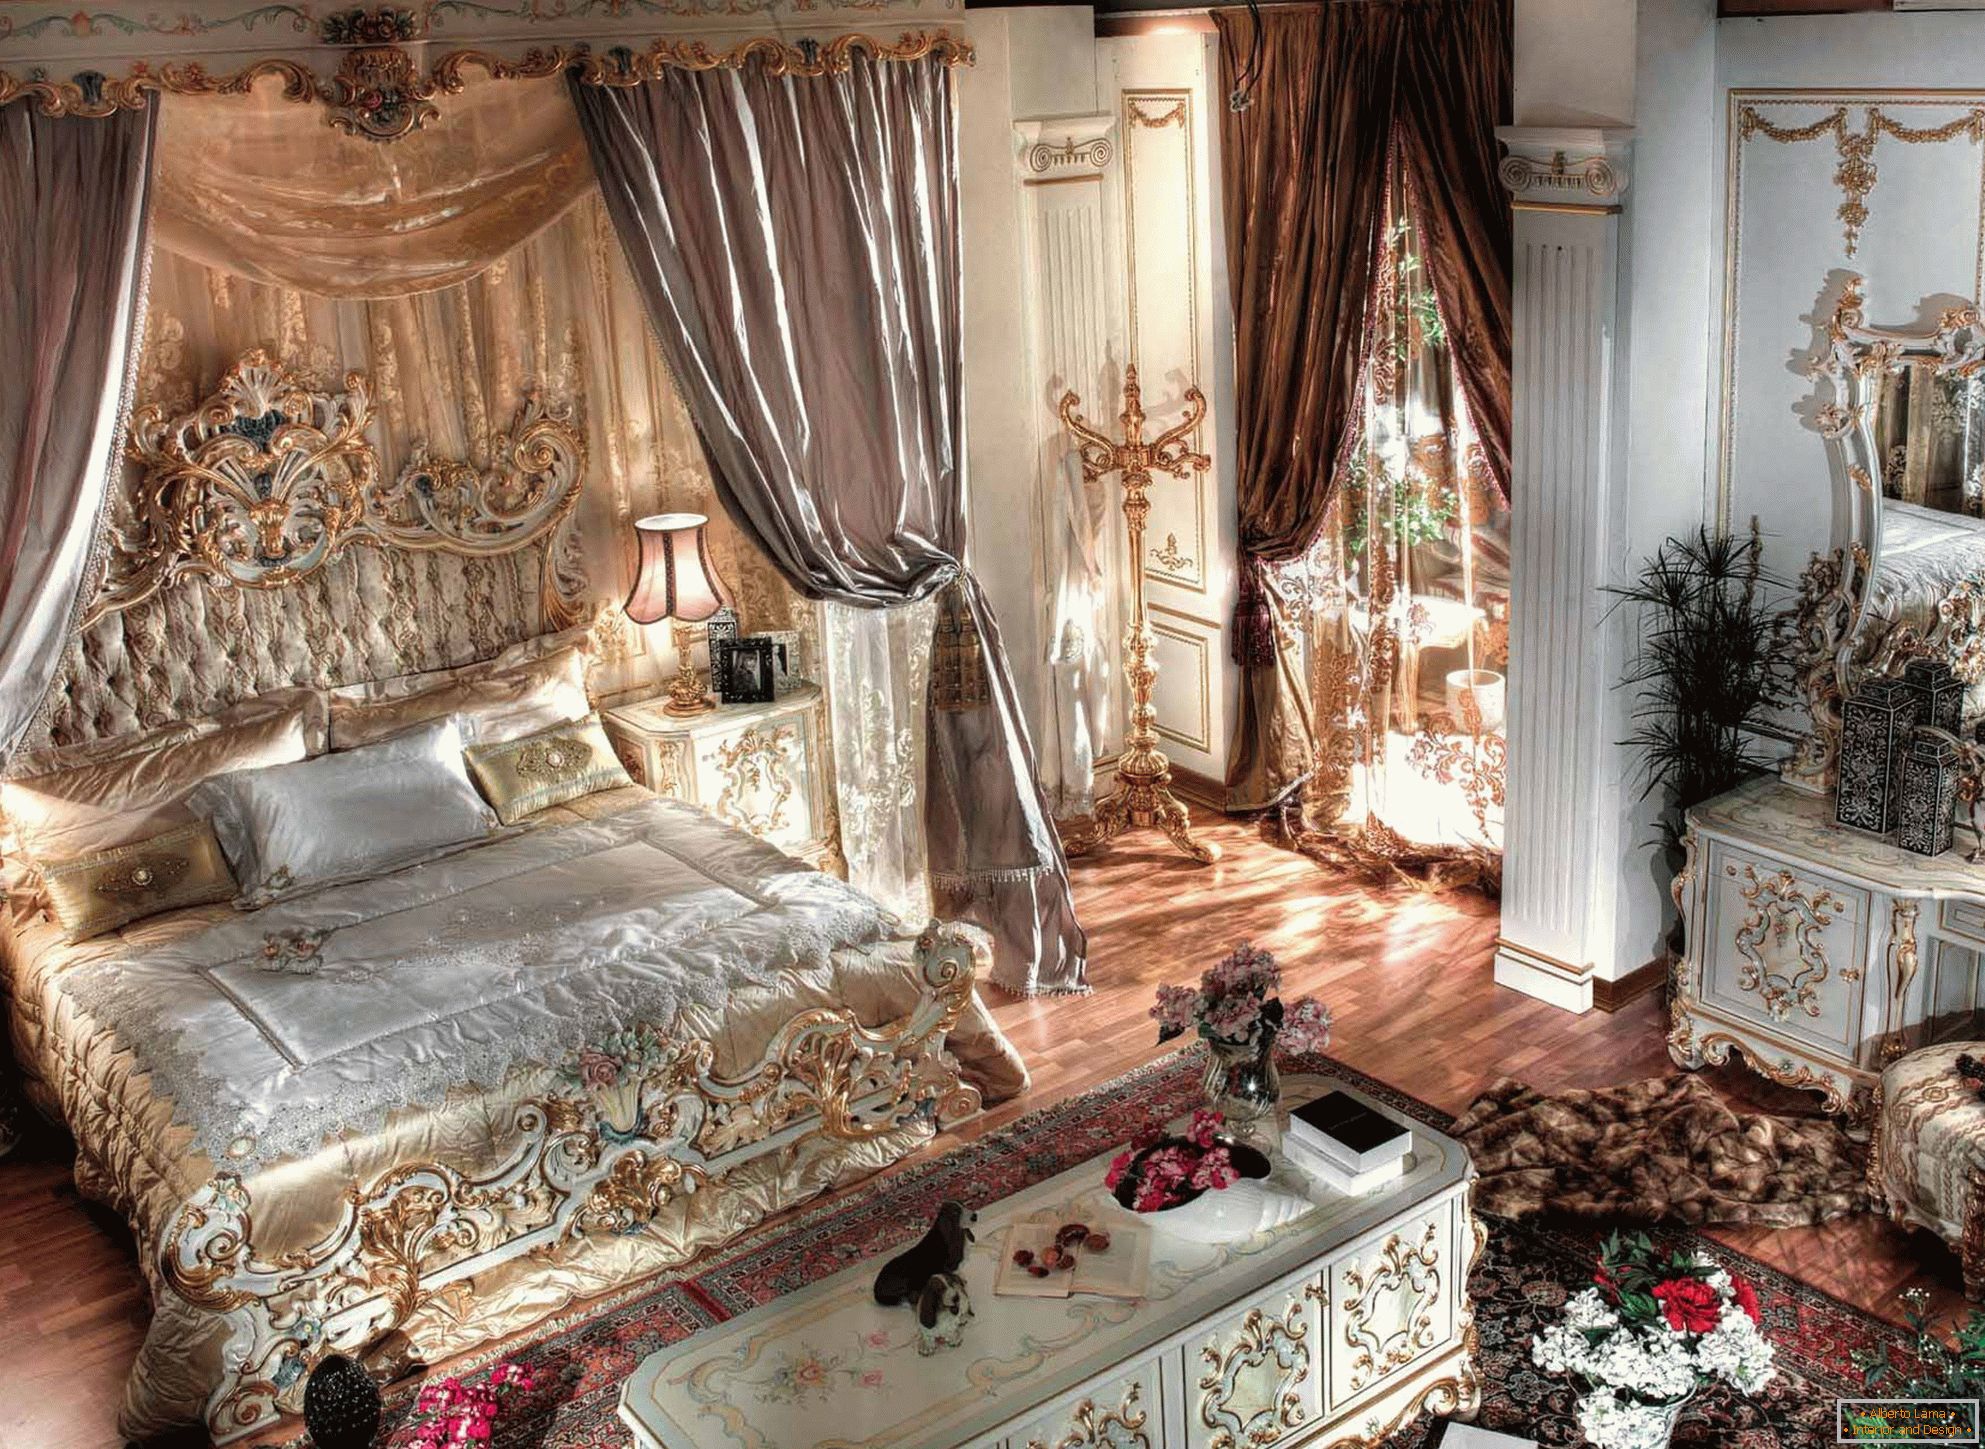 Luxurious baroque bedroom with high ceilings. In the center of the composition is a massive bed made of wood with carved backs.